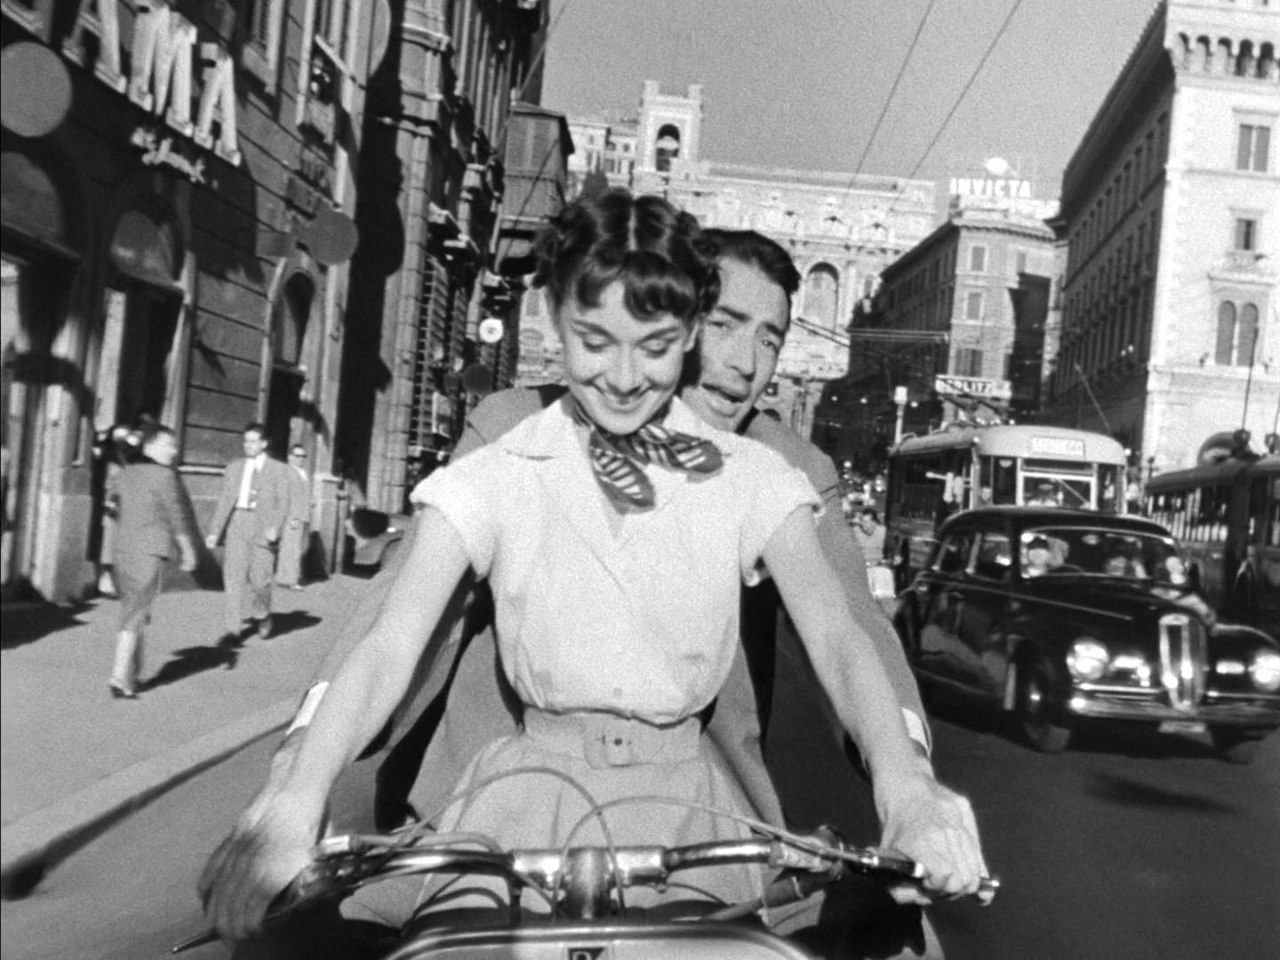 Audrey and Gregory on a motor bike together